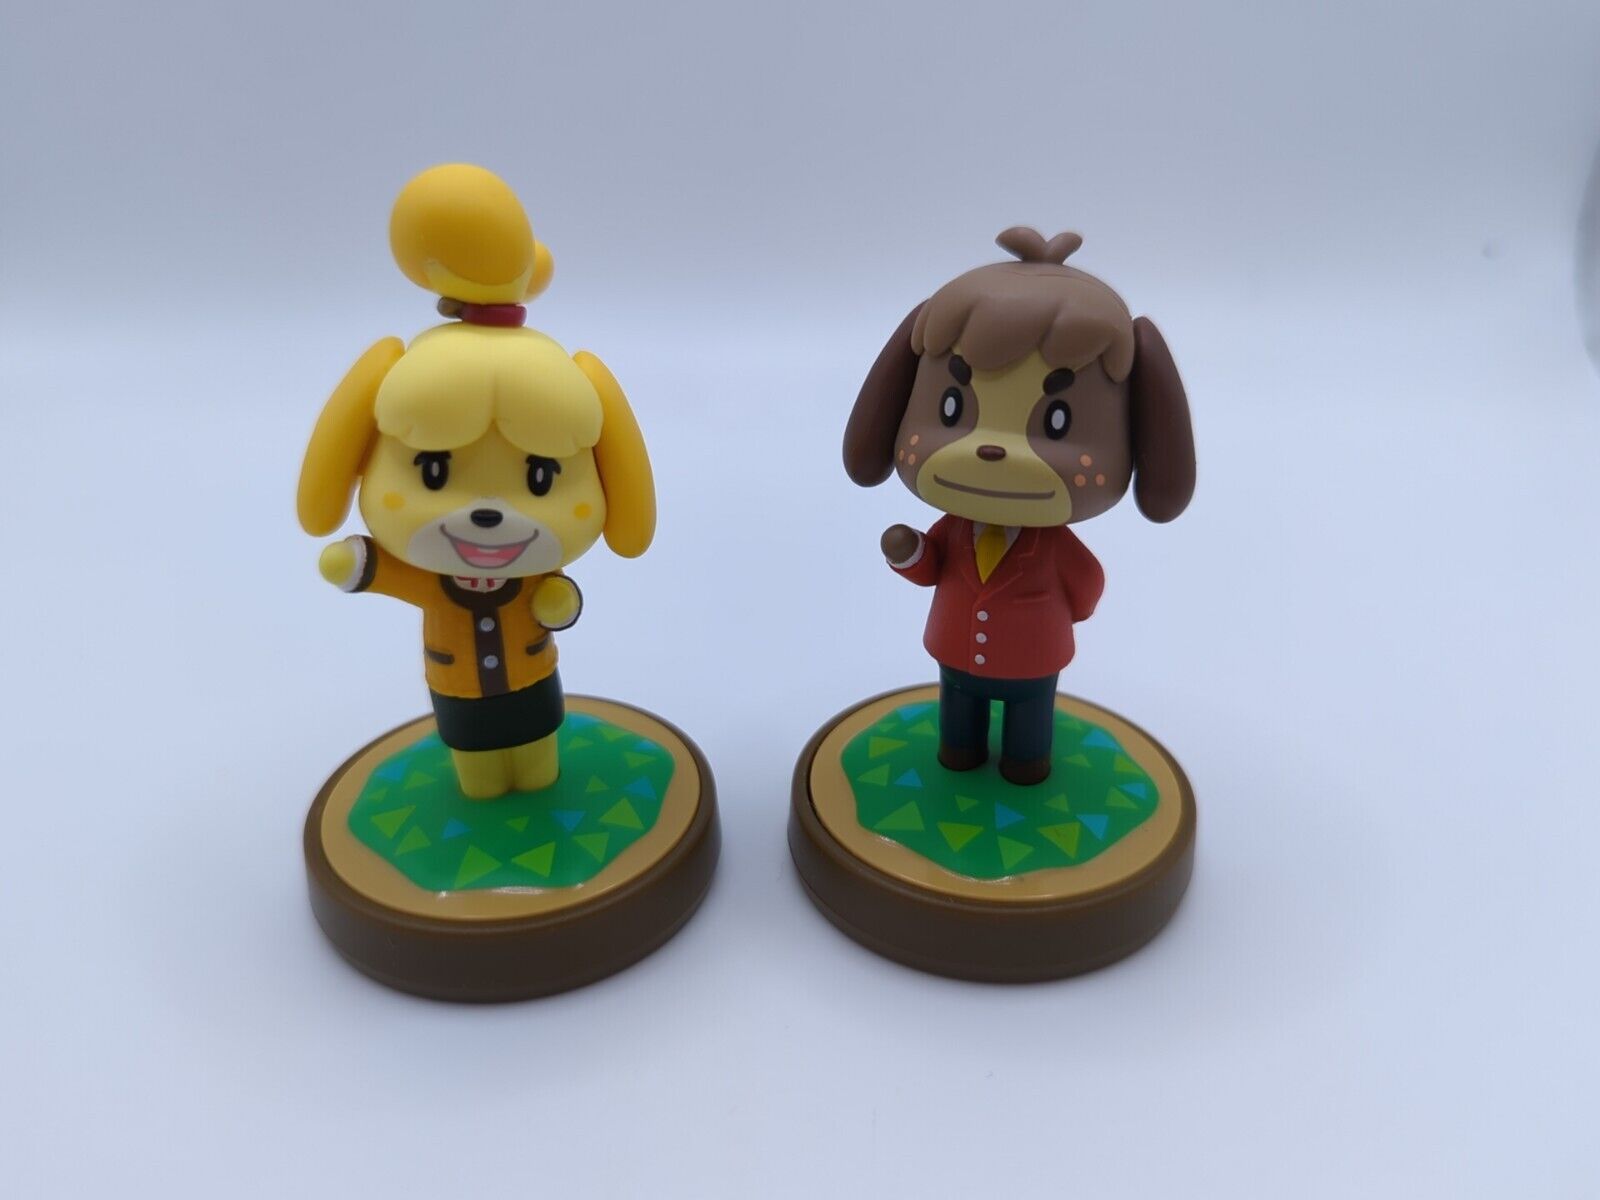 Nintendo Animal Crossing Amiibo Set - Isabelle (Winter Outfit) & Digby